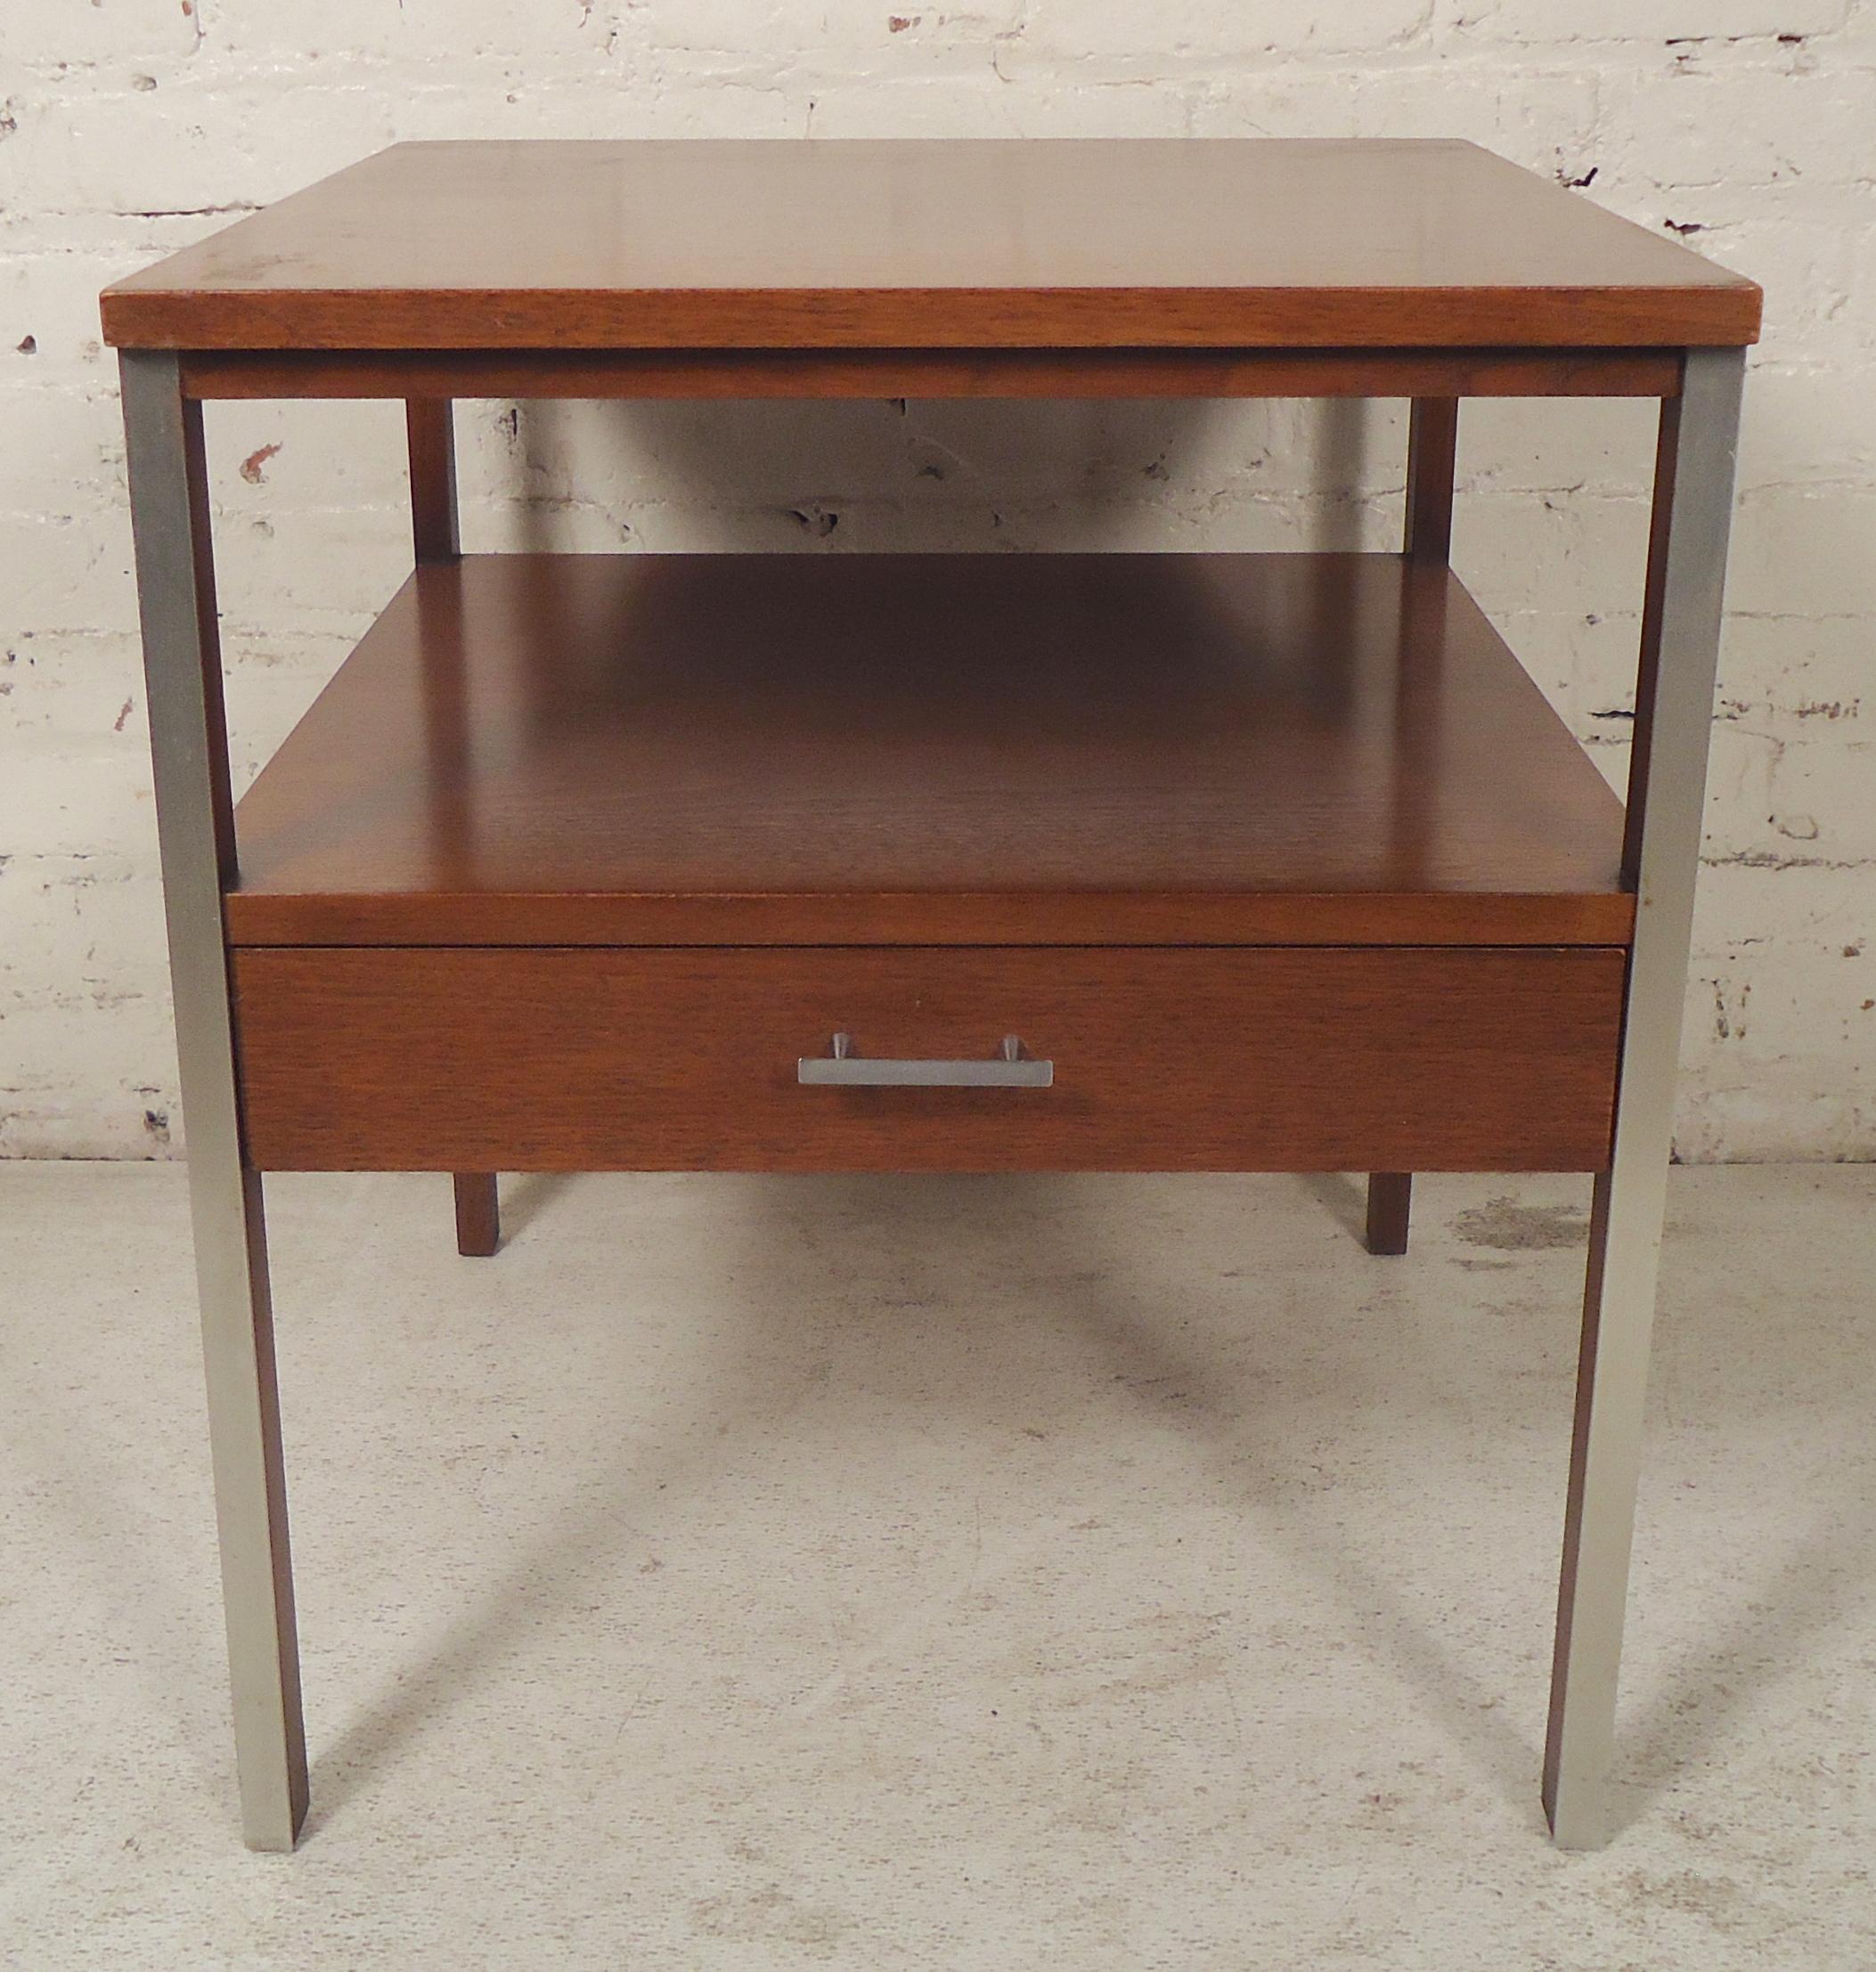 Mid-Century Modern end table designed by Paul McCobb for his Calvin line. Walnut grain with accenting chrome handle and trim.
(Please confirm item location - NY or NJ - with dealer).
  